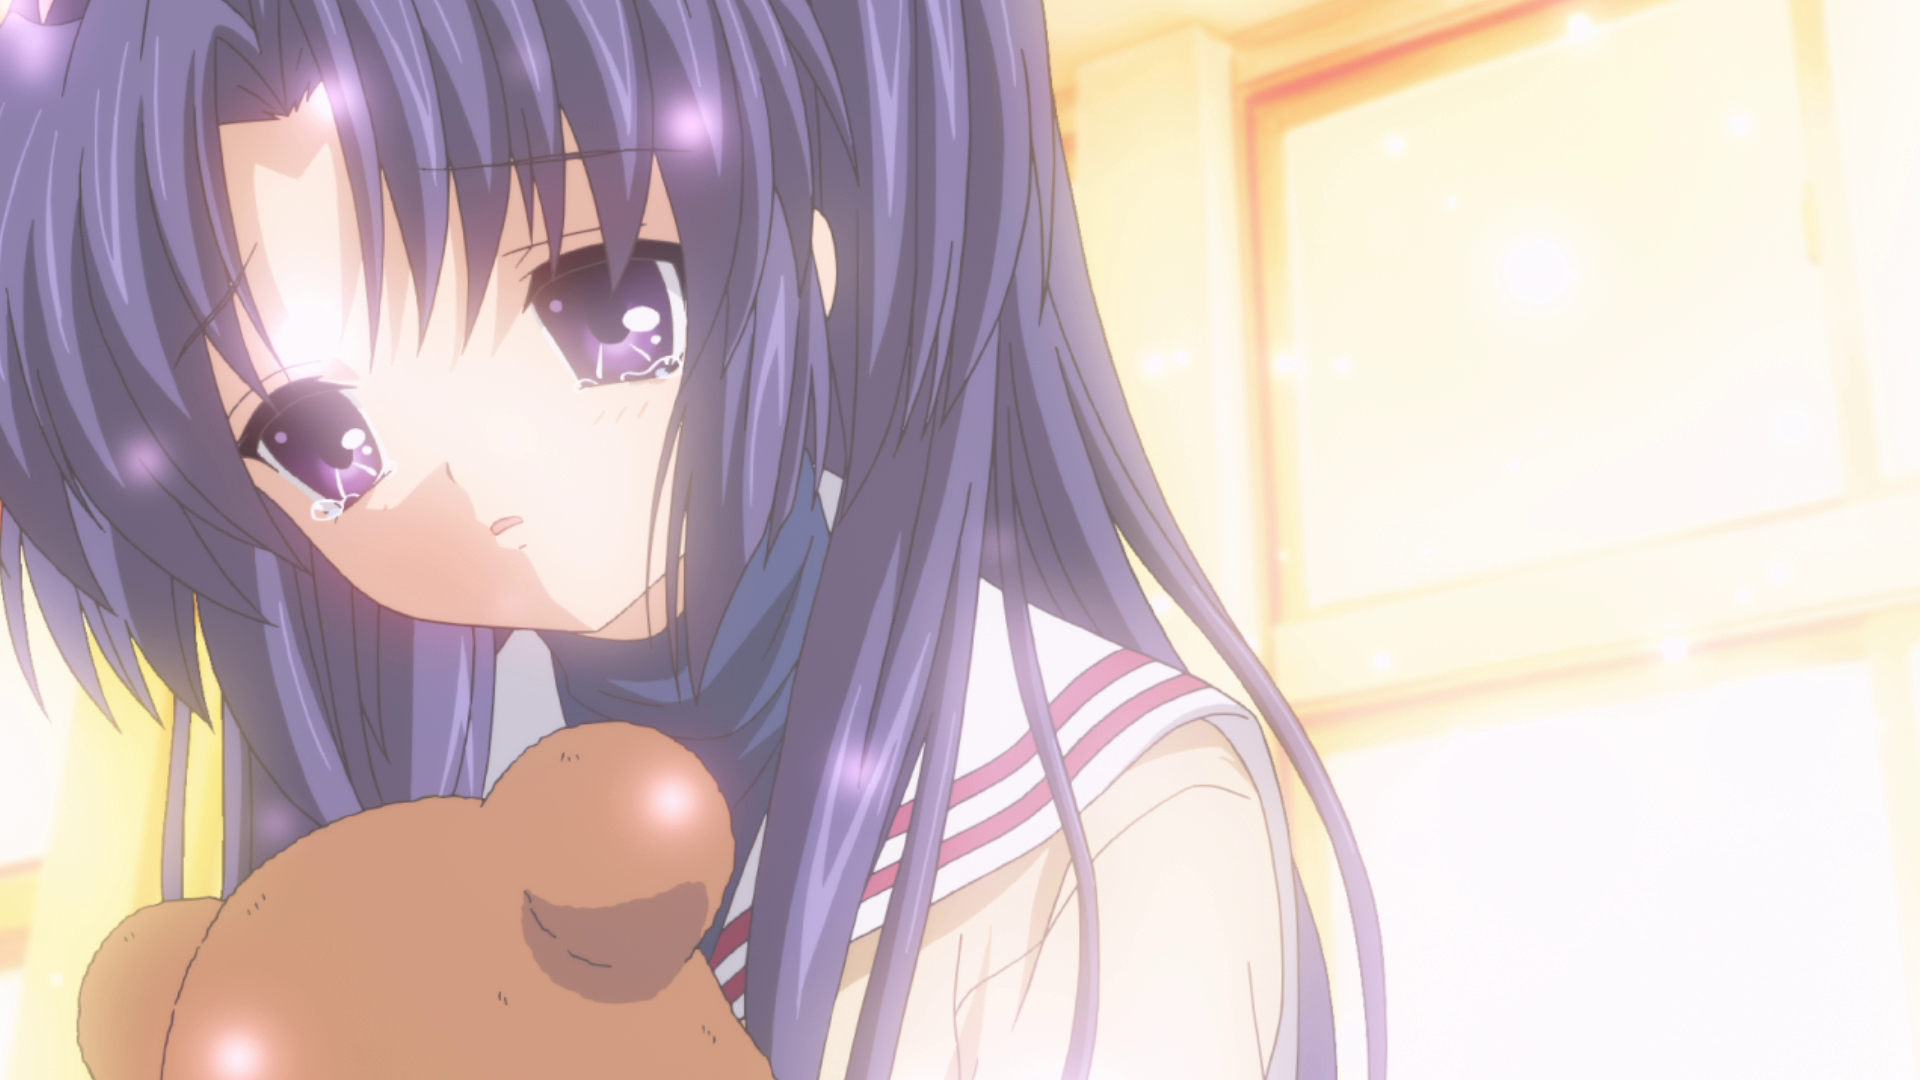 Clannad１４話感想 Theory Of Everything アニメ魔法少女思い出ブログ